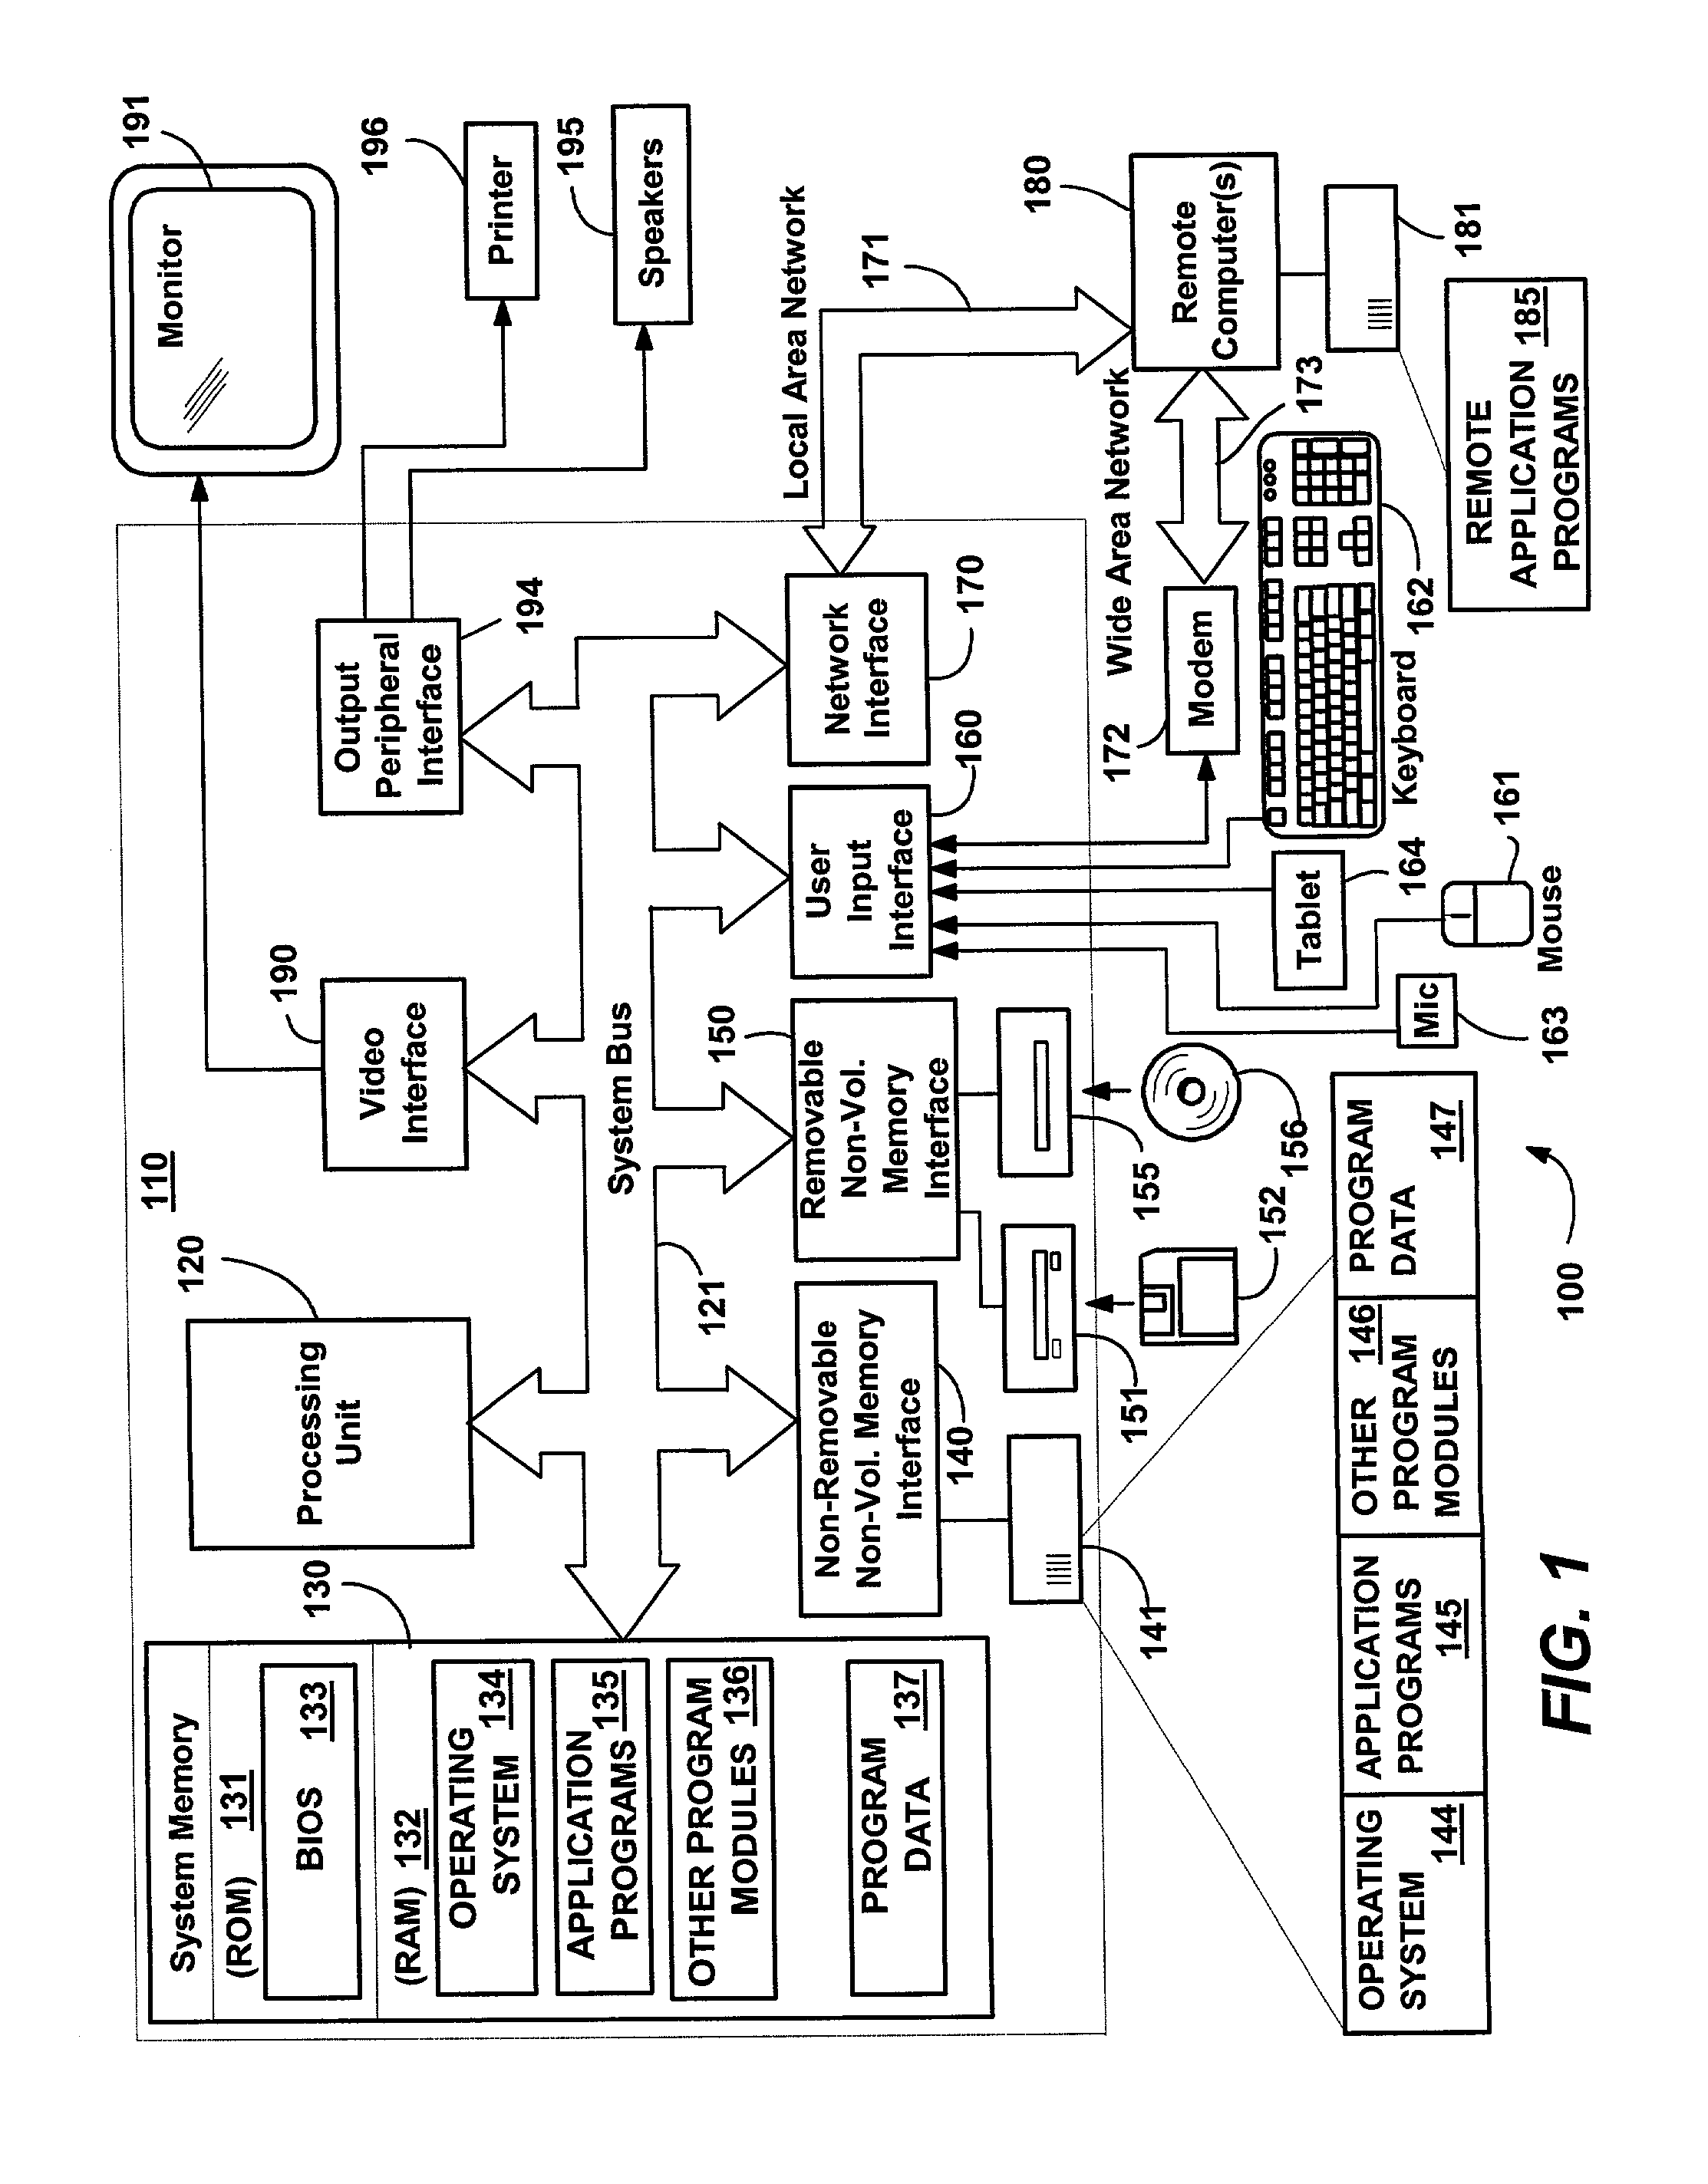 Method and system for migrating computer state